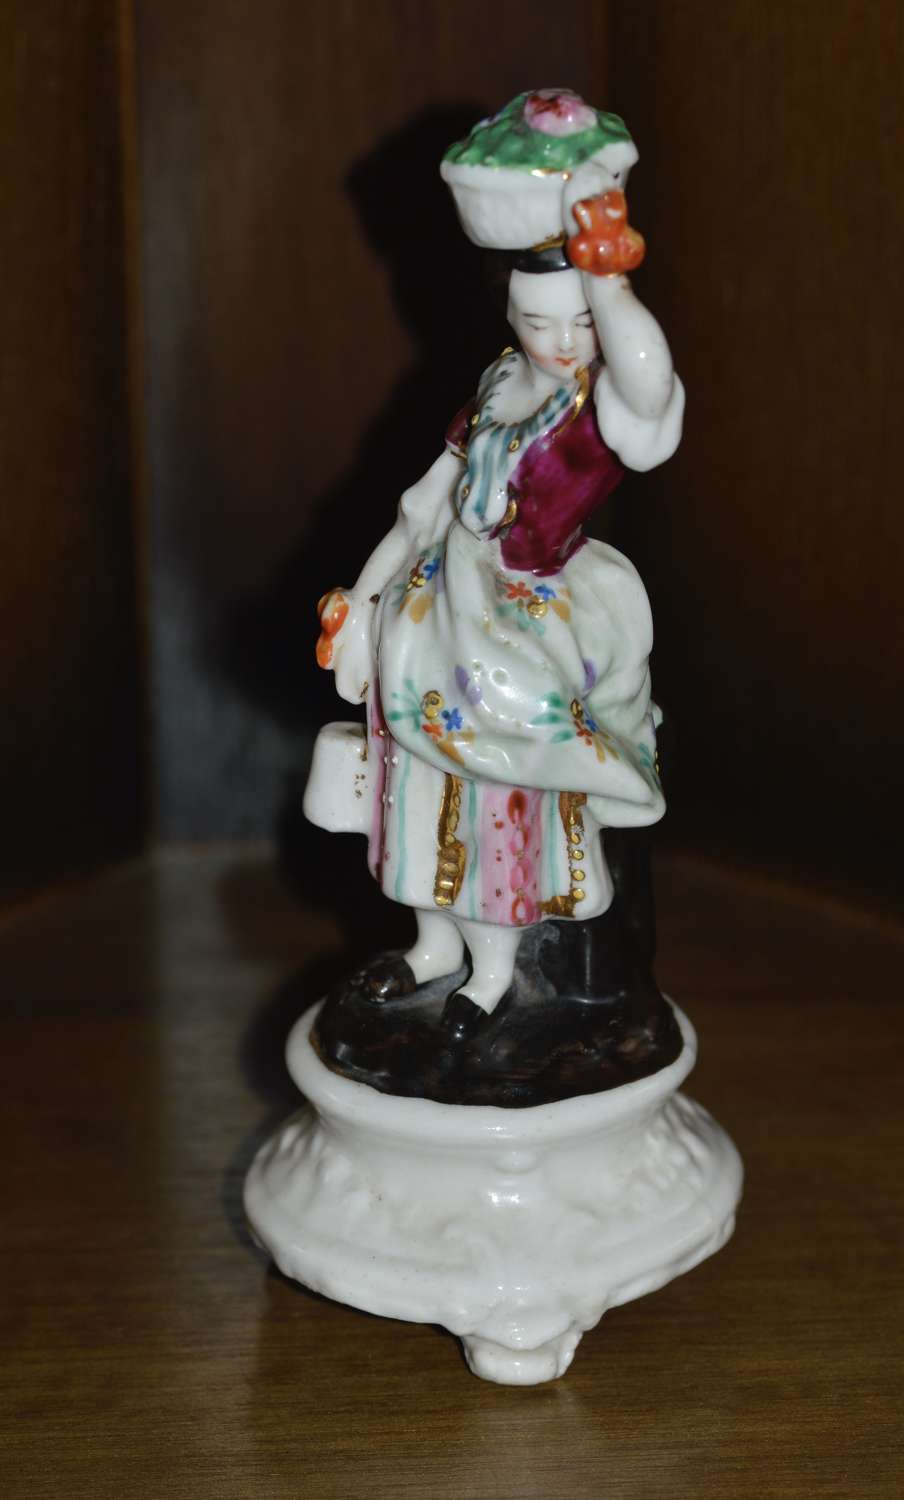 Early 19th Century Hard-Paste Hand-Painted German Porcelain Figurine